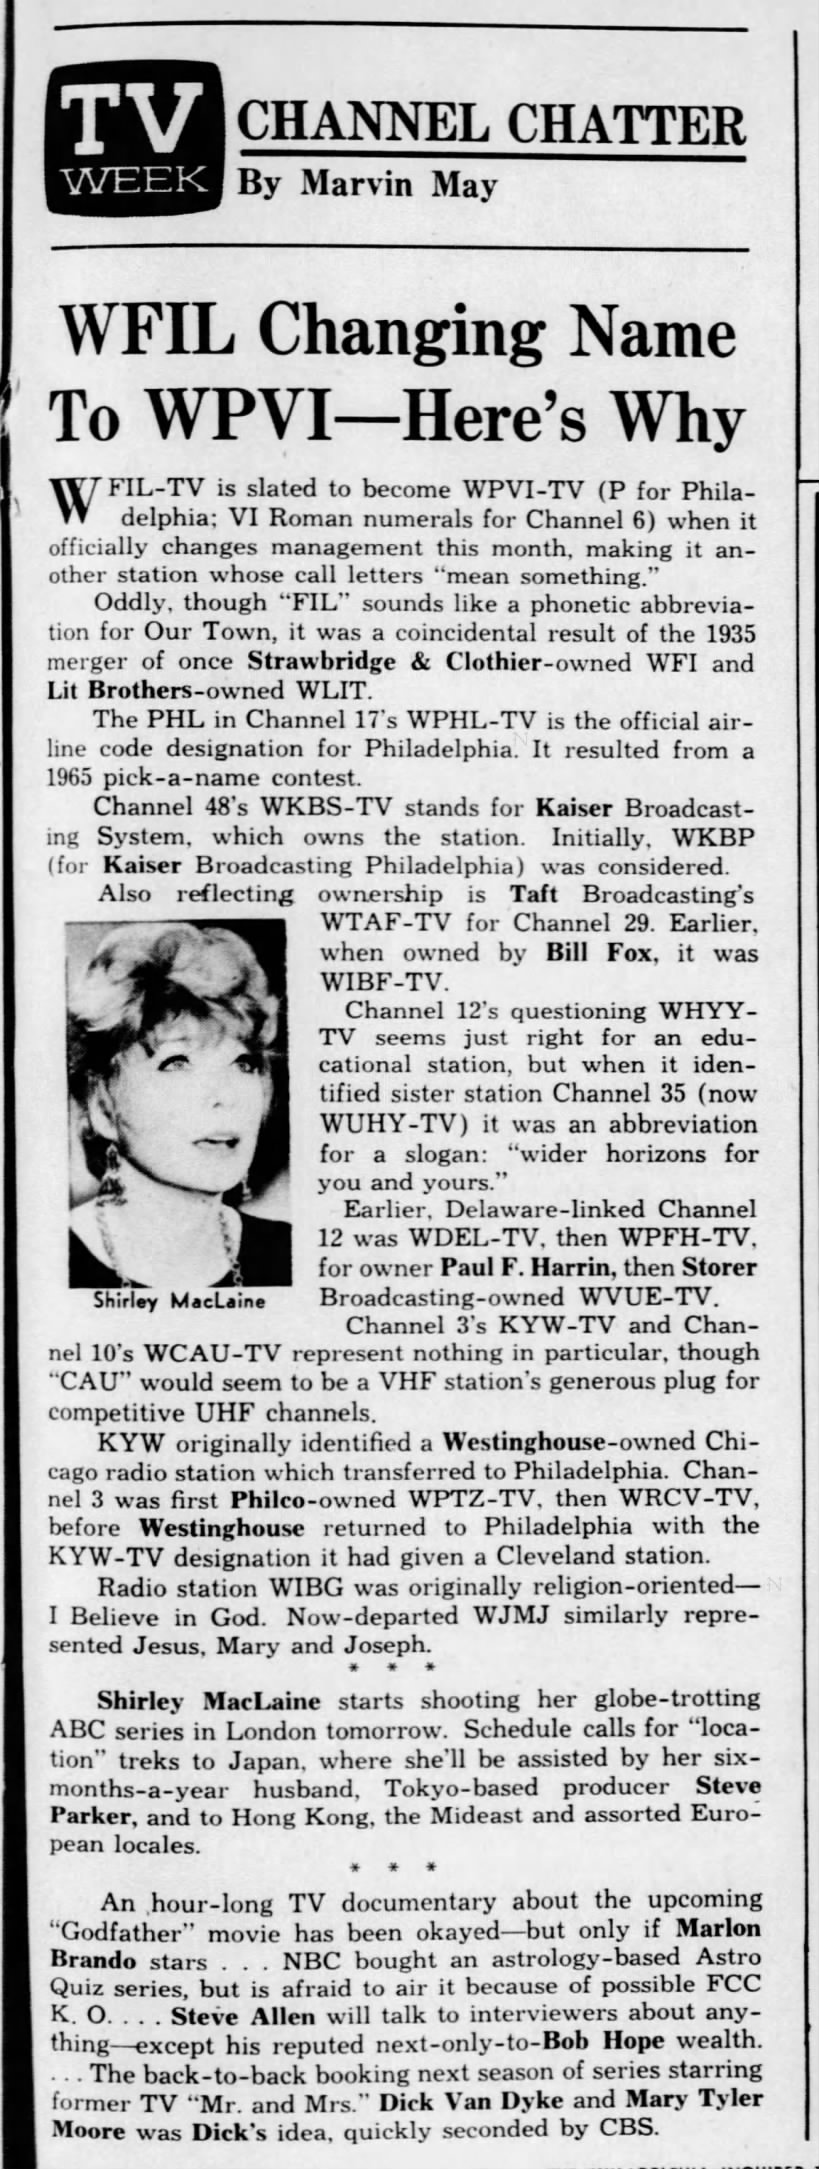 WFIL Changing Name To WPVI—Here's Why